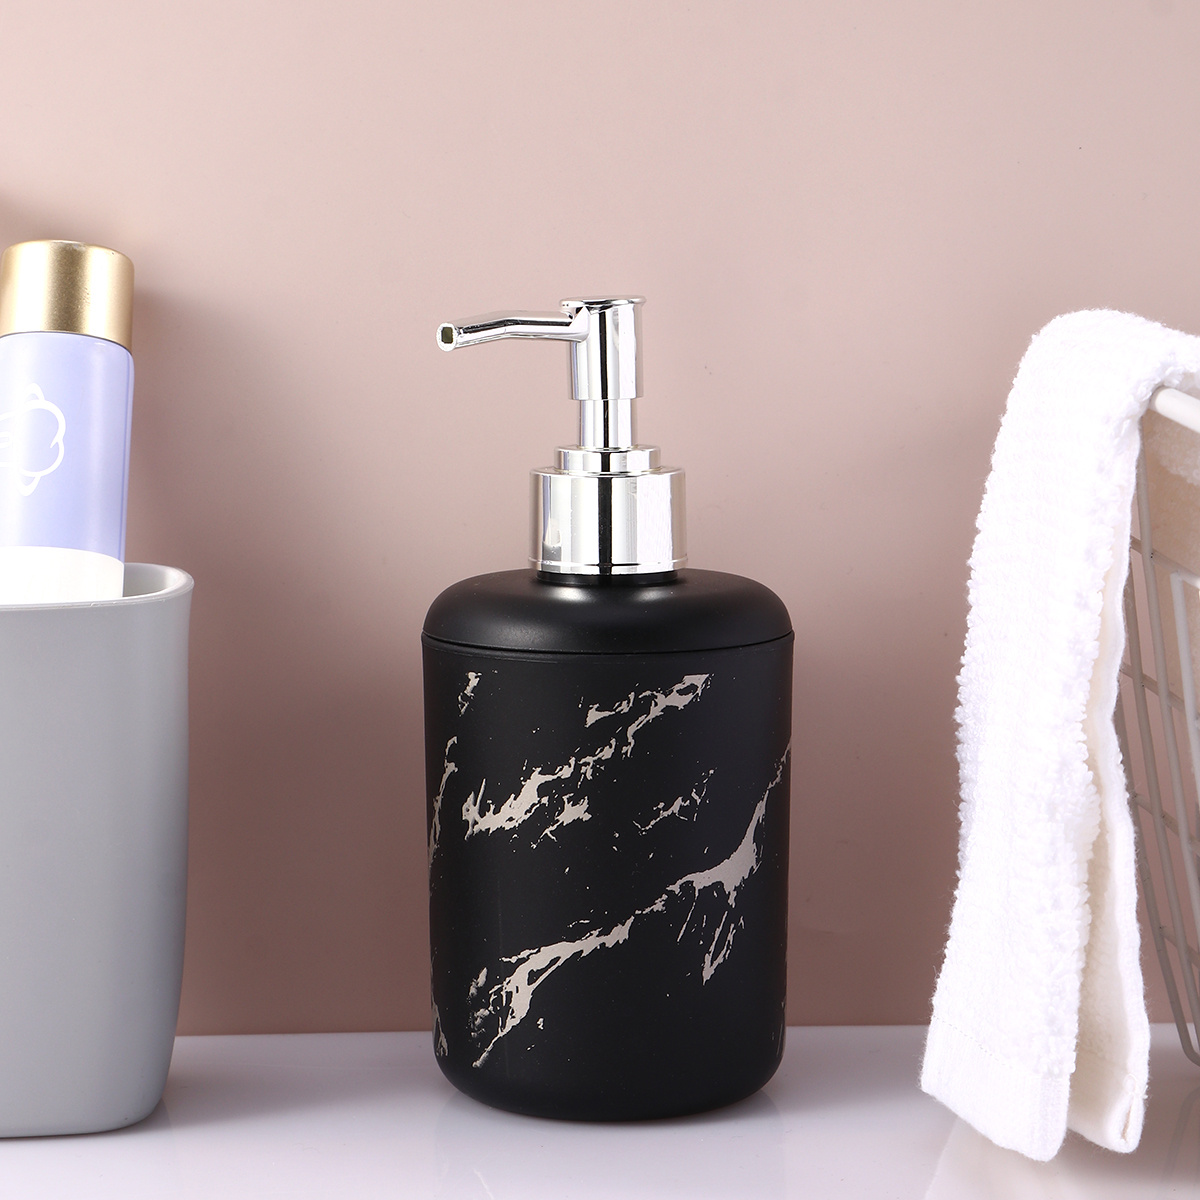 

1pc Black Ceramic Soap Dispenser With Silver Pump, Modern Marbled Pattern, Bathroom And Kitchen Accessory, Refillable Liquid Hand Soap Container